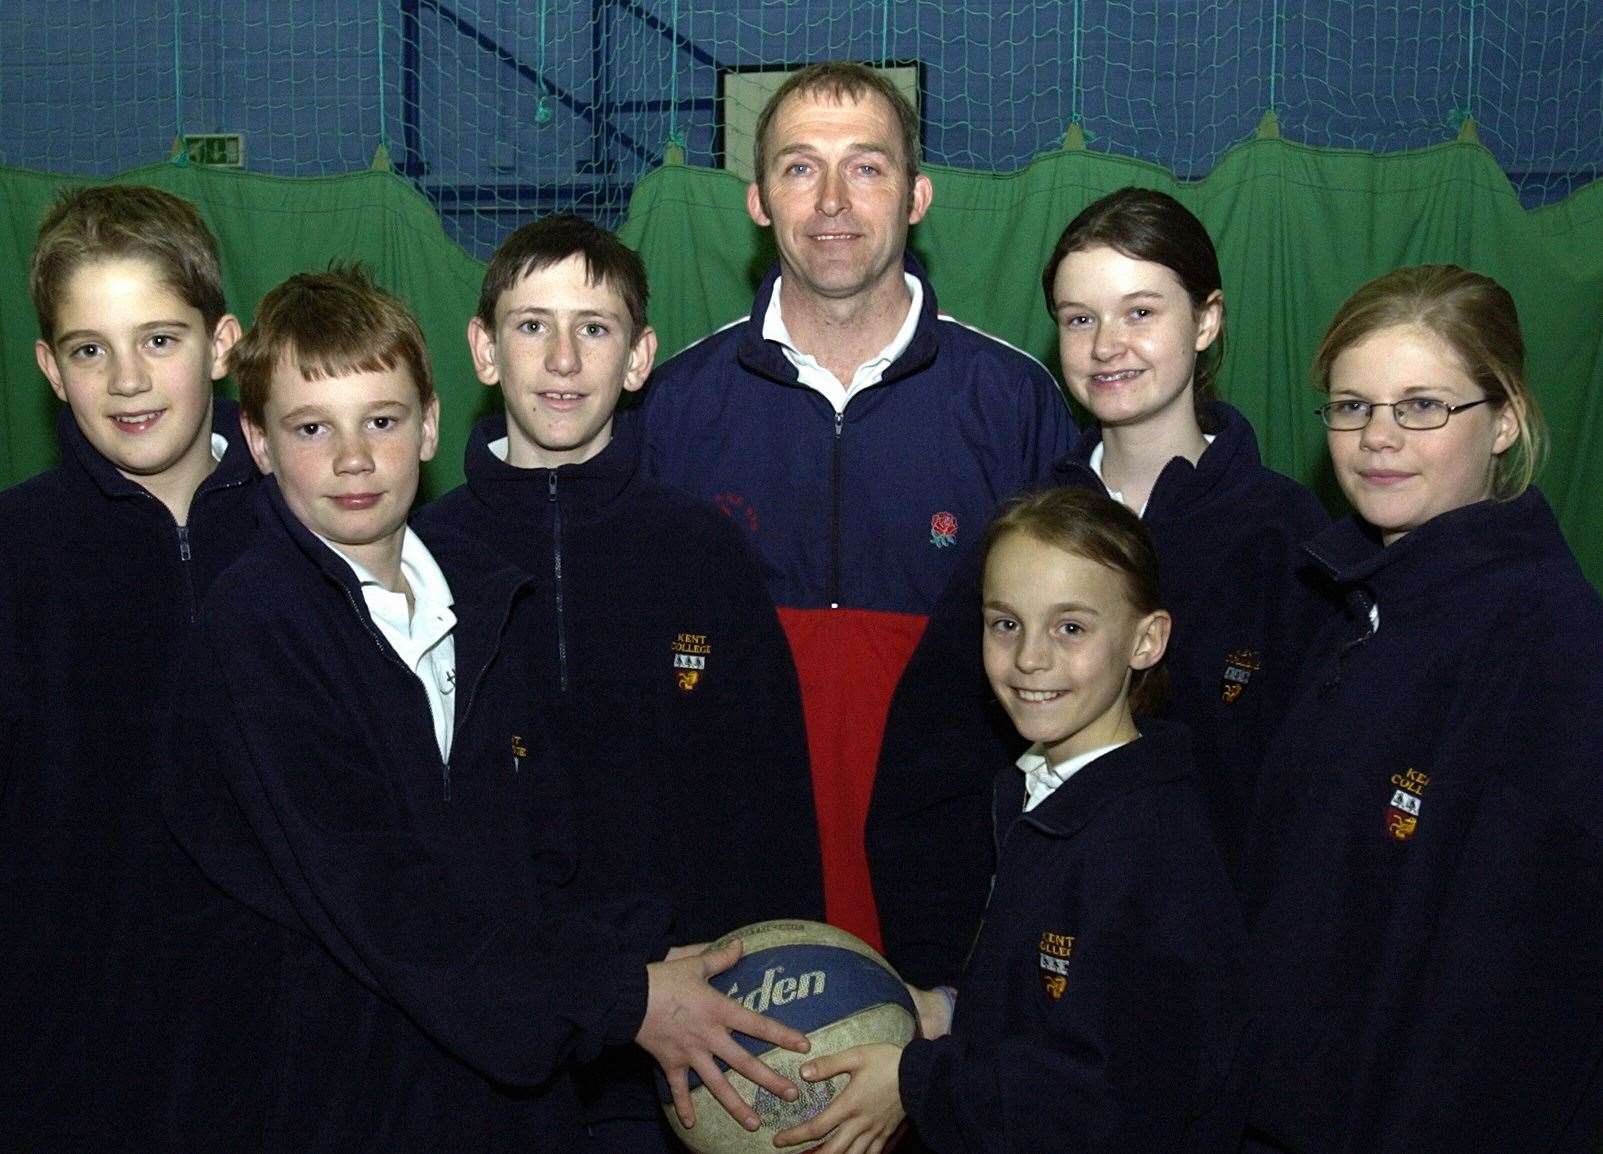 John Burnage, photographed in 2004 when he was was head of PE at Kent College, with some of his Year 7 pupils